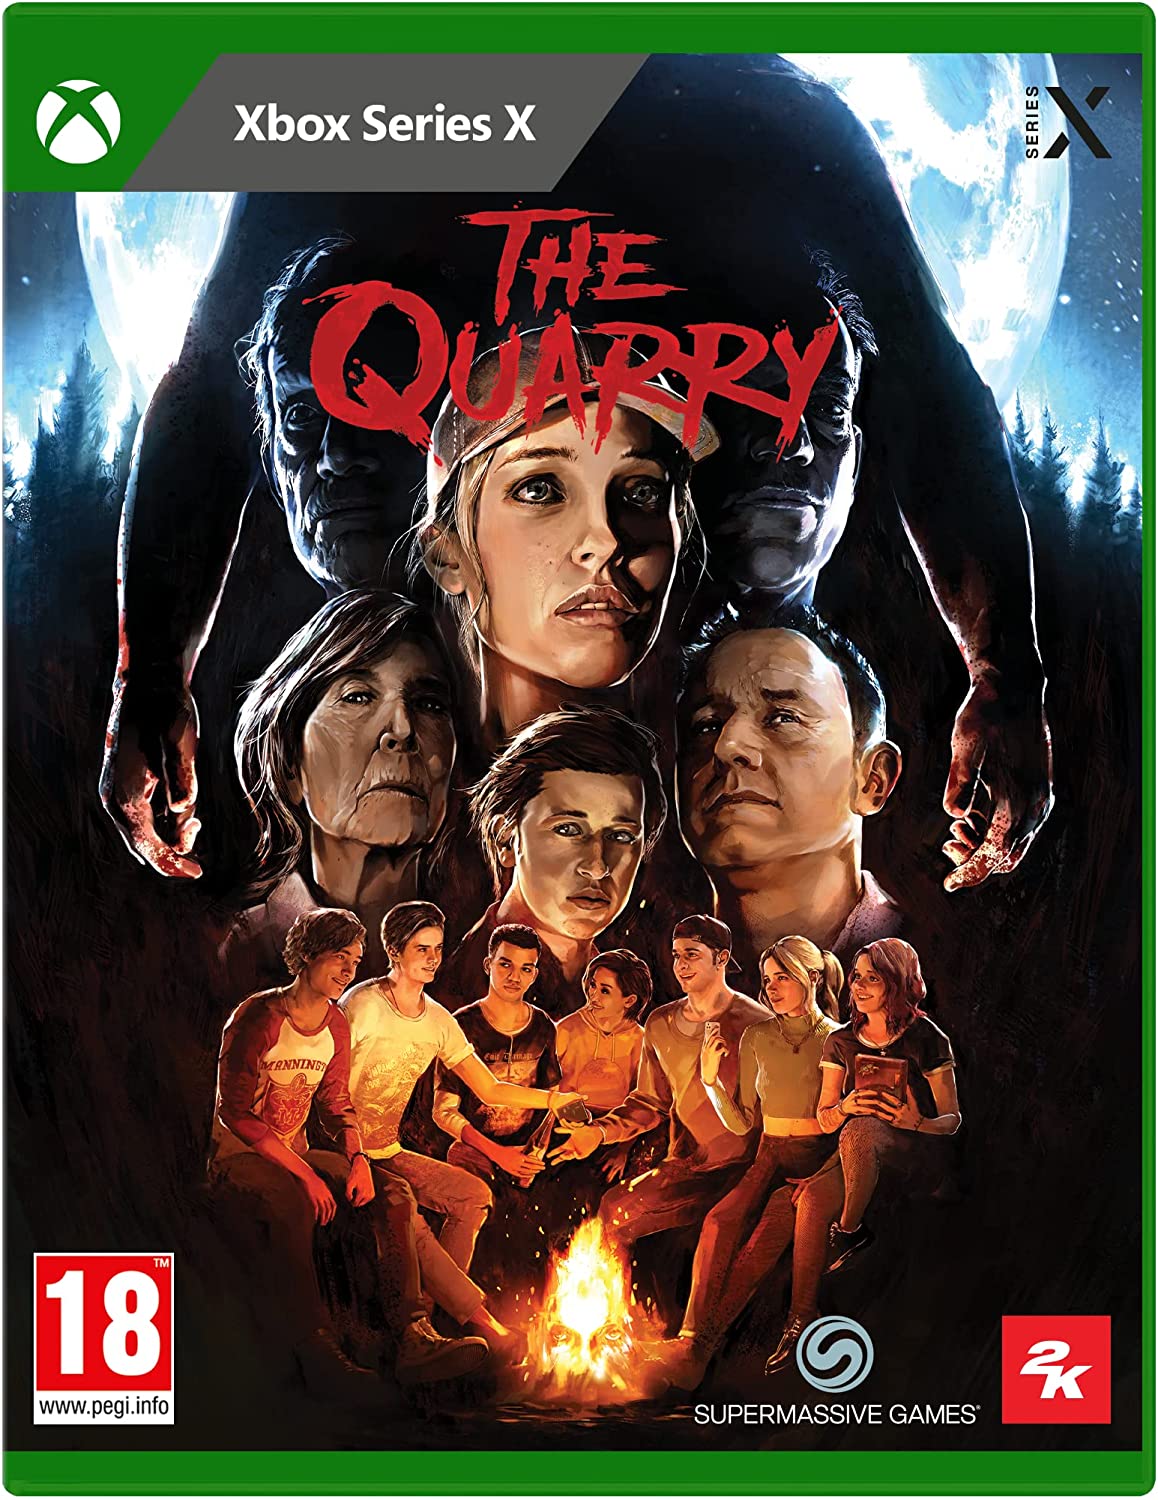 The Quarry Digital Download Key (Xbox One): Europe